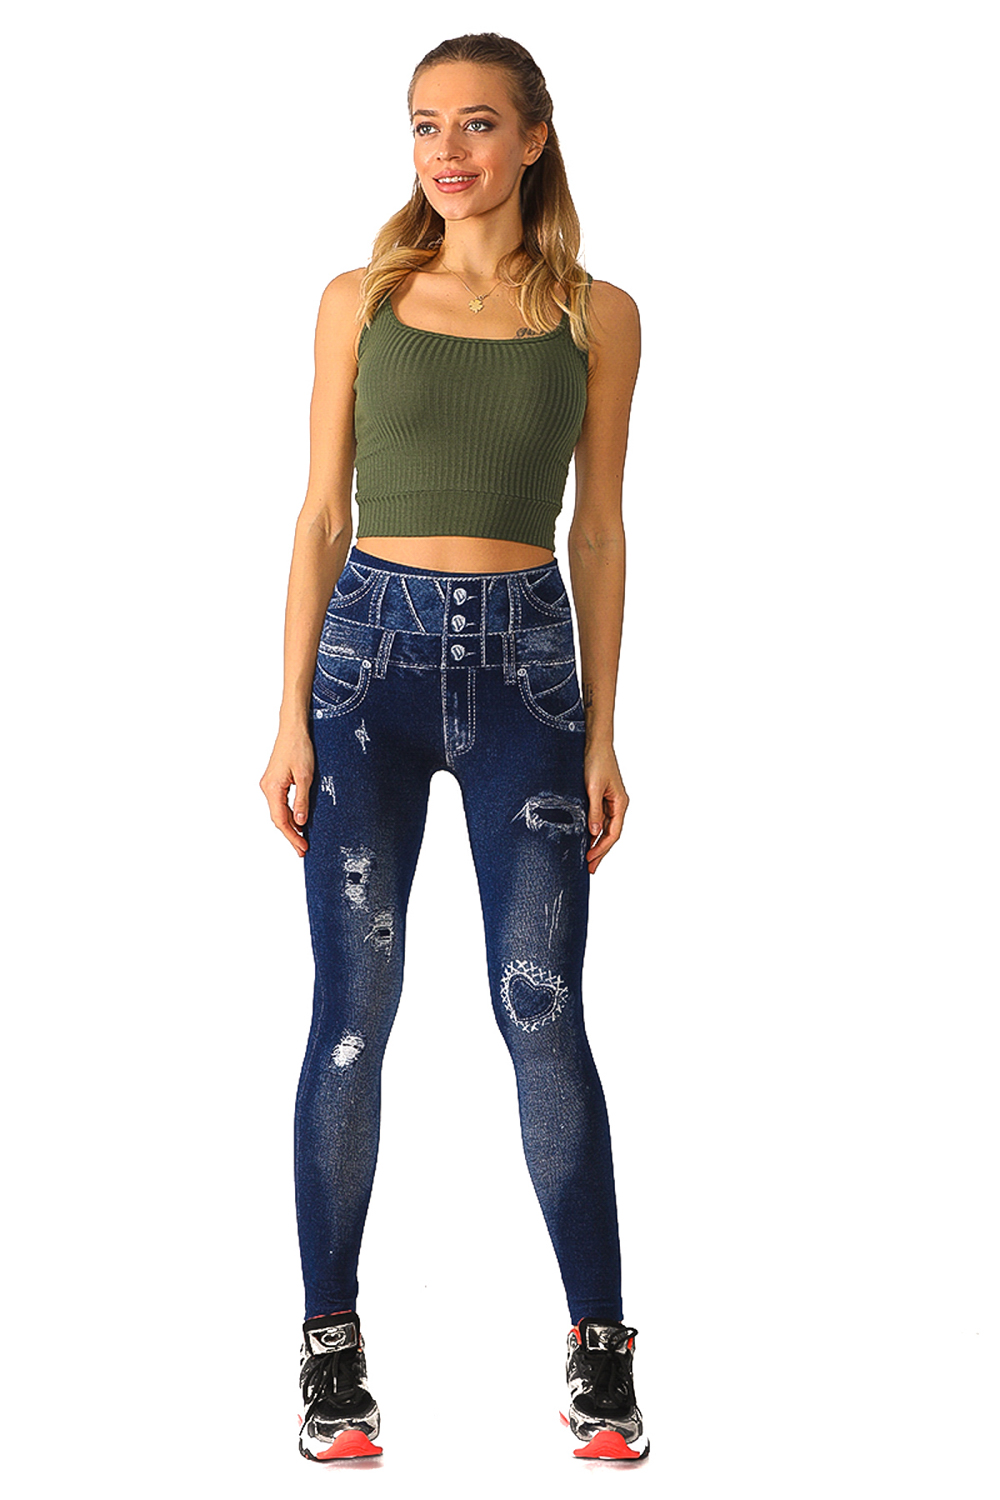 Denim Leggings with Butterfly and Floral Pattern - Its All Leggings